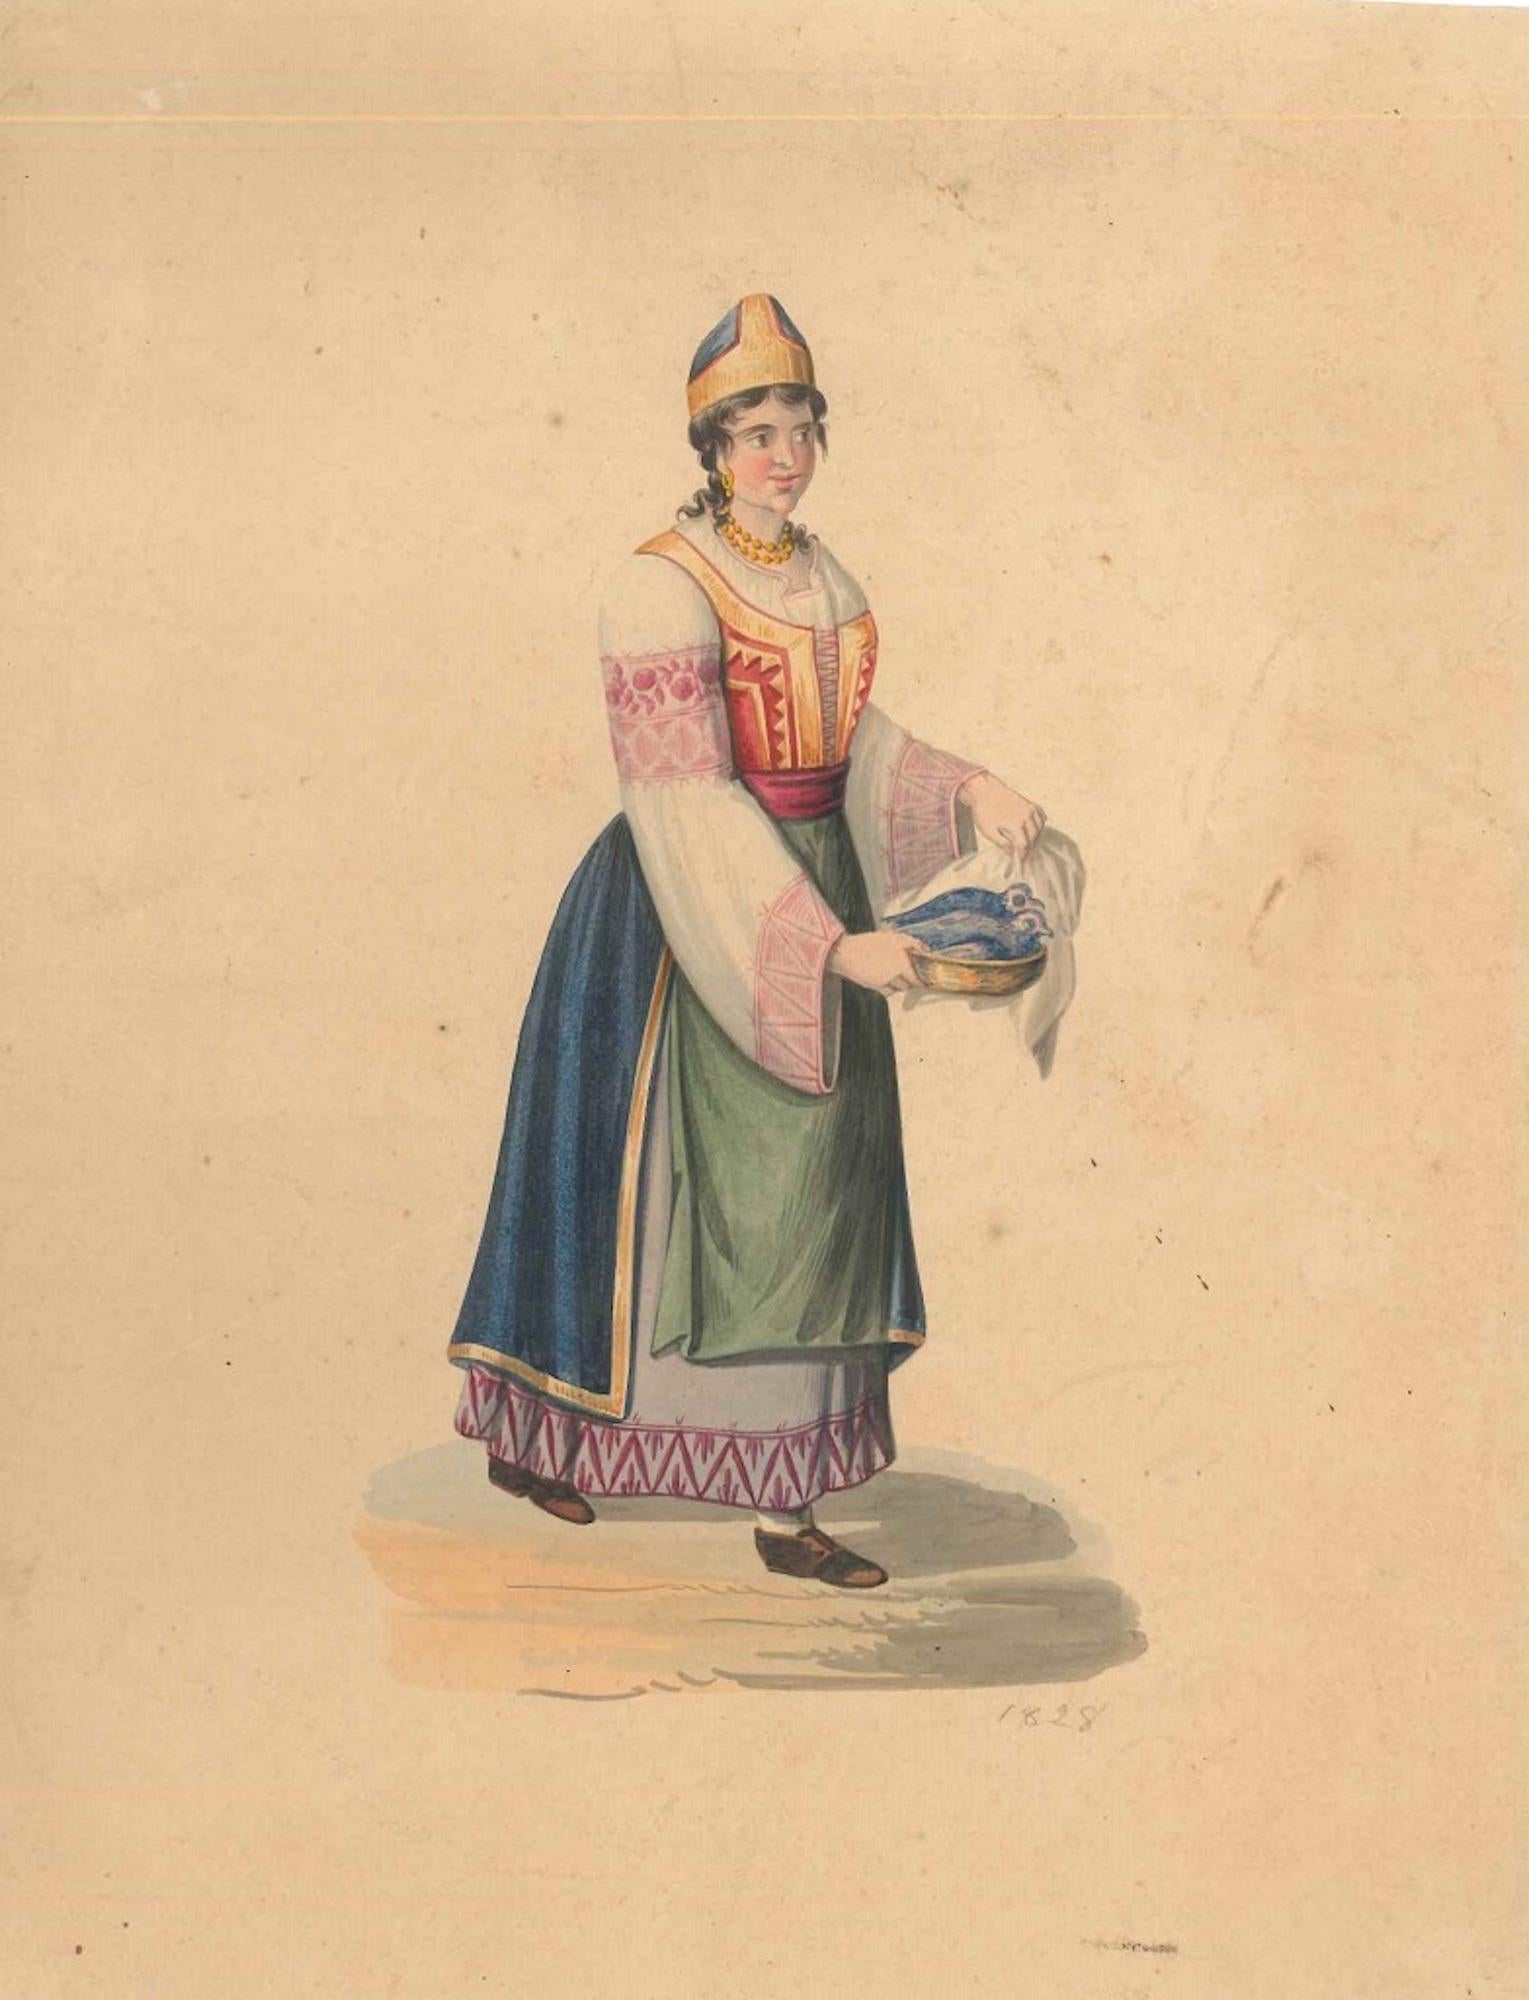 Woman in Typical Costumes  - Watercolor by M. De Vito - 1820 ca.